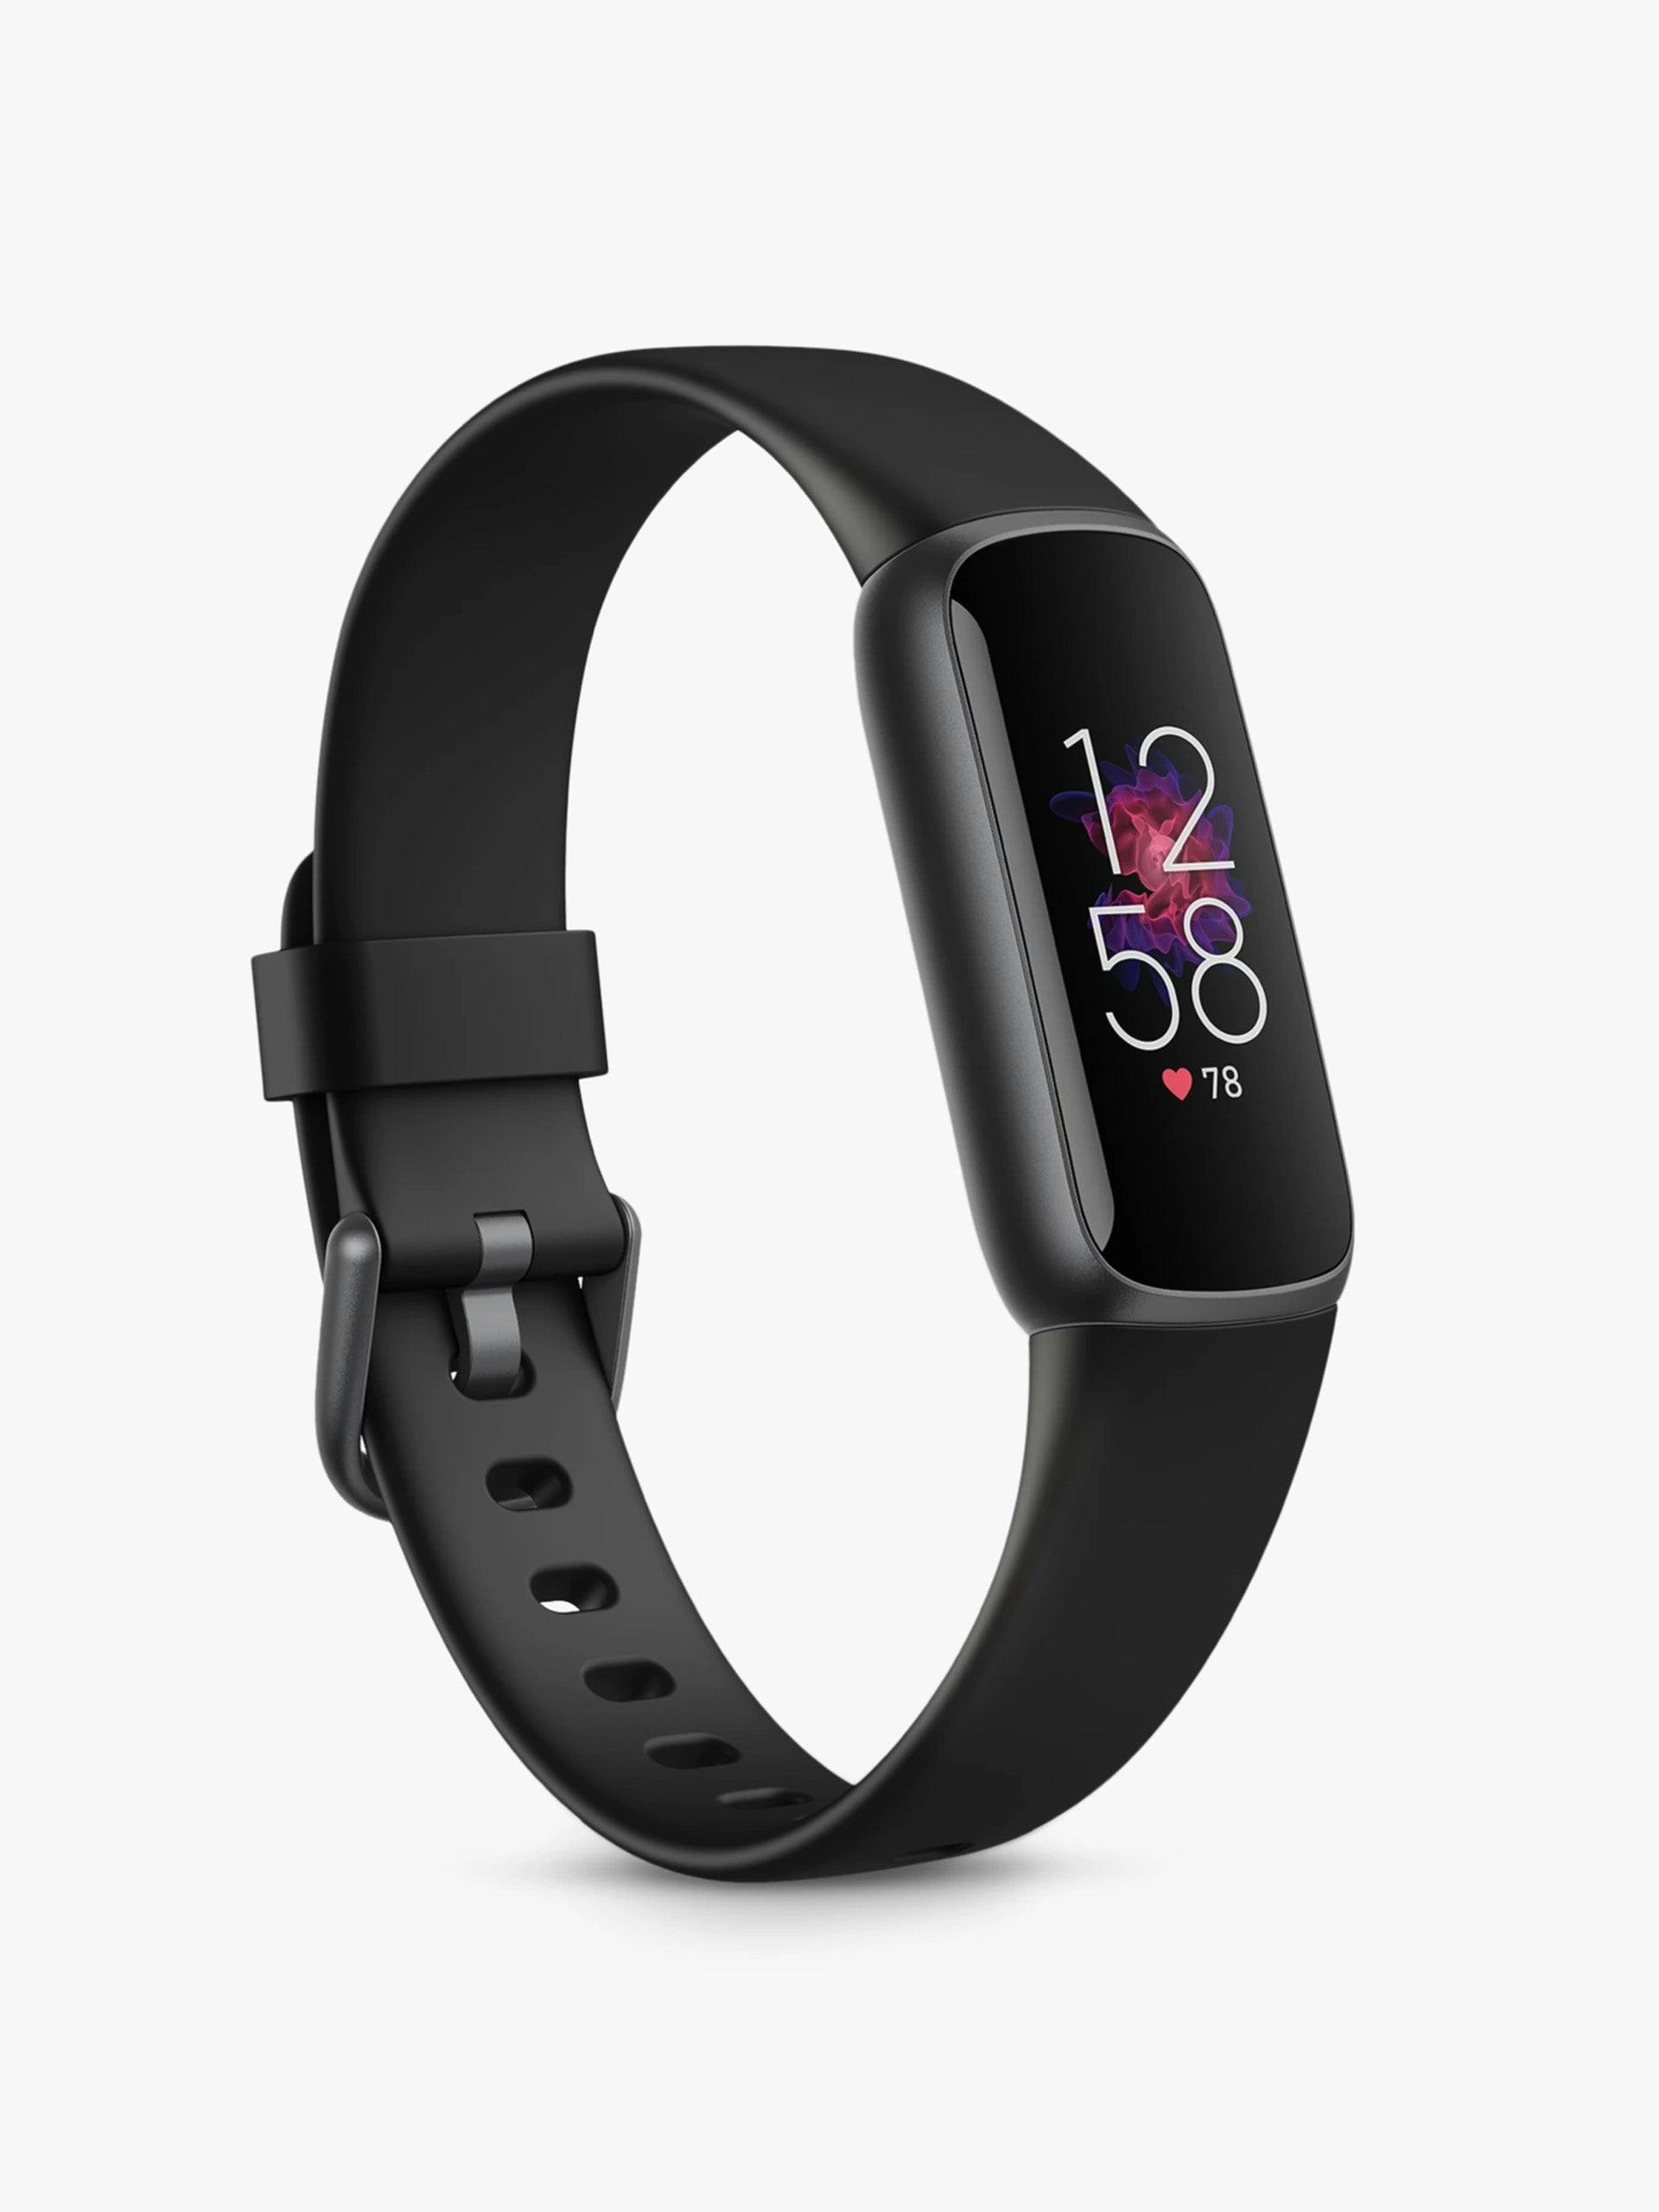 Fitness and wellness tracker watch